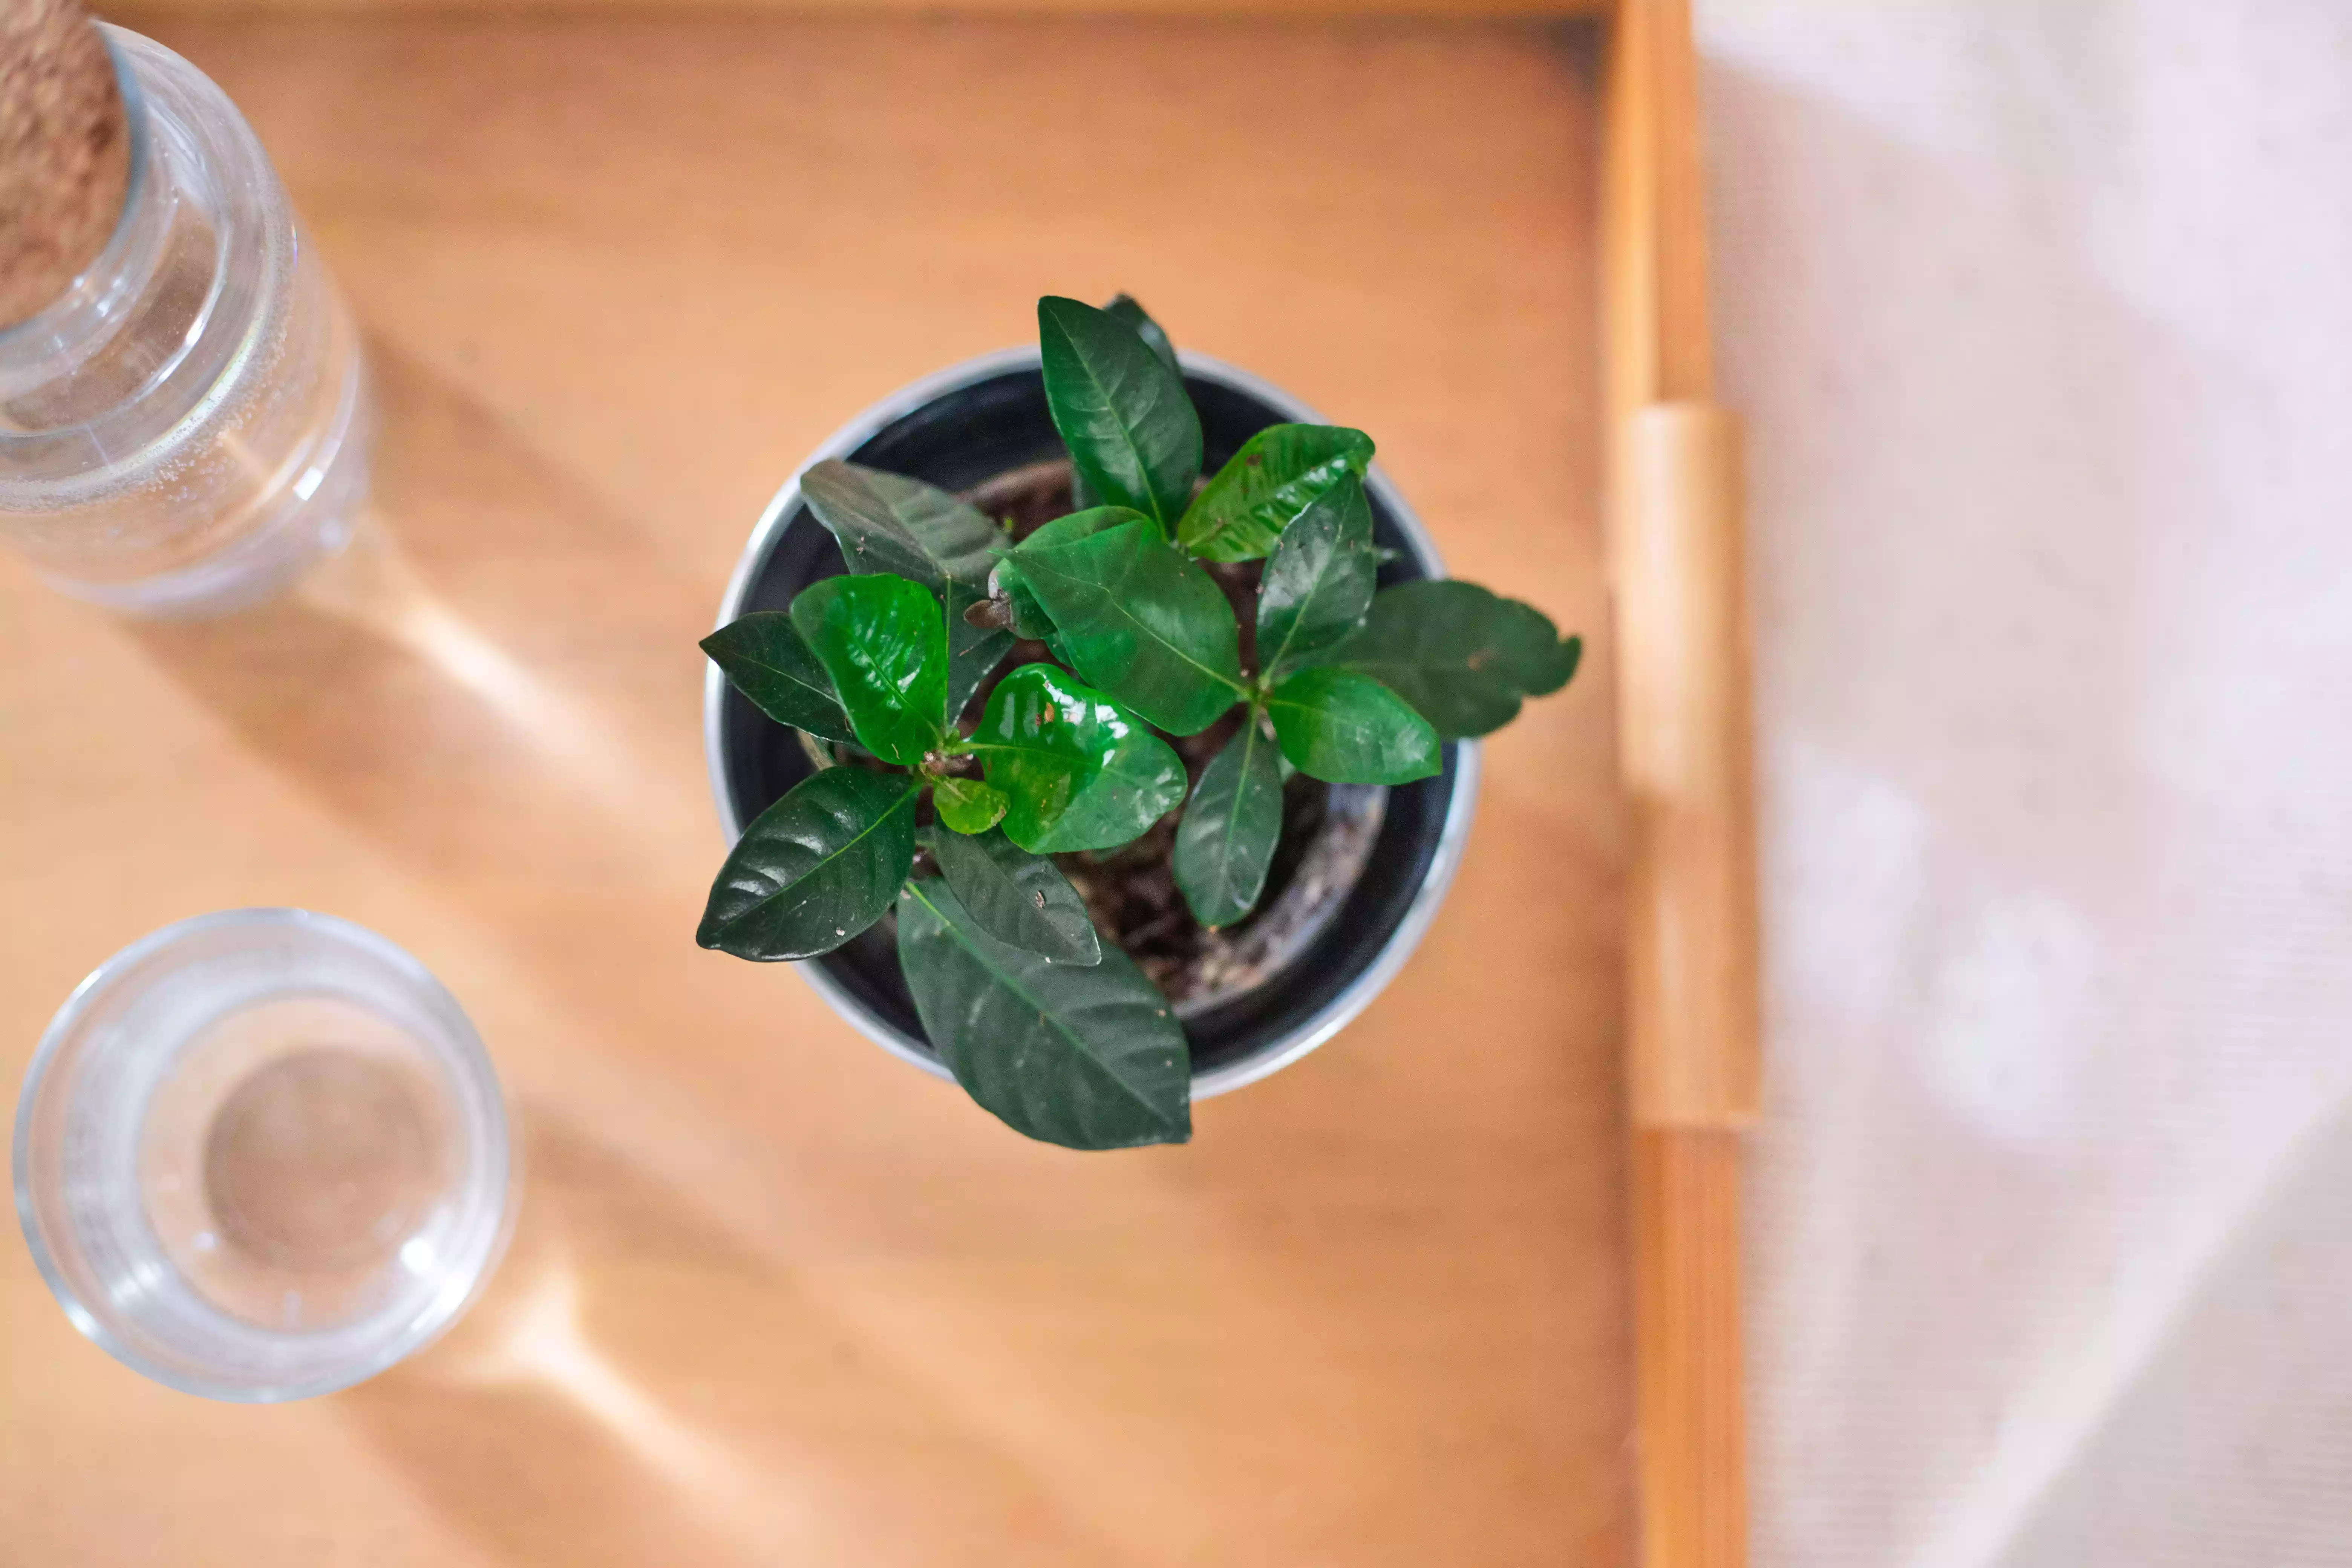 small gardenia plant with shiny green leaves on breakfast tray with water glass